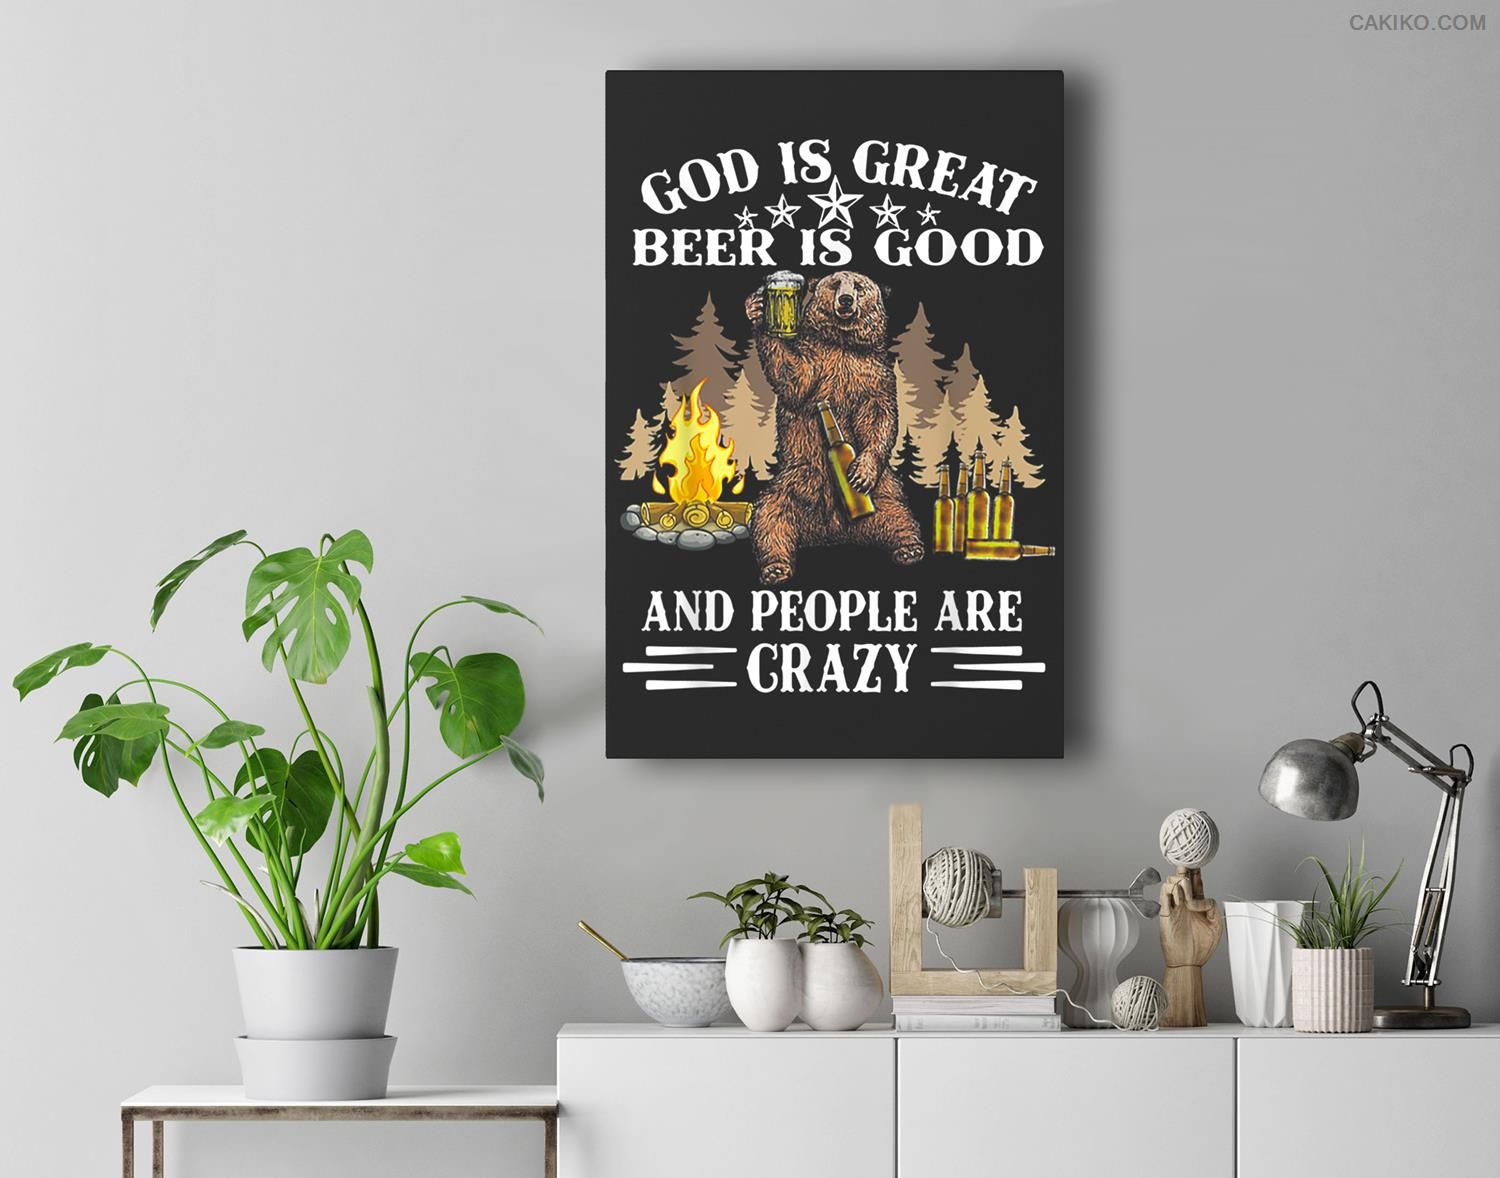 Bear Camping God Is Great Beer Is Good And People Are Crazy Premium Wall Art Canvas Decor